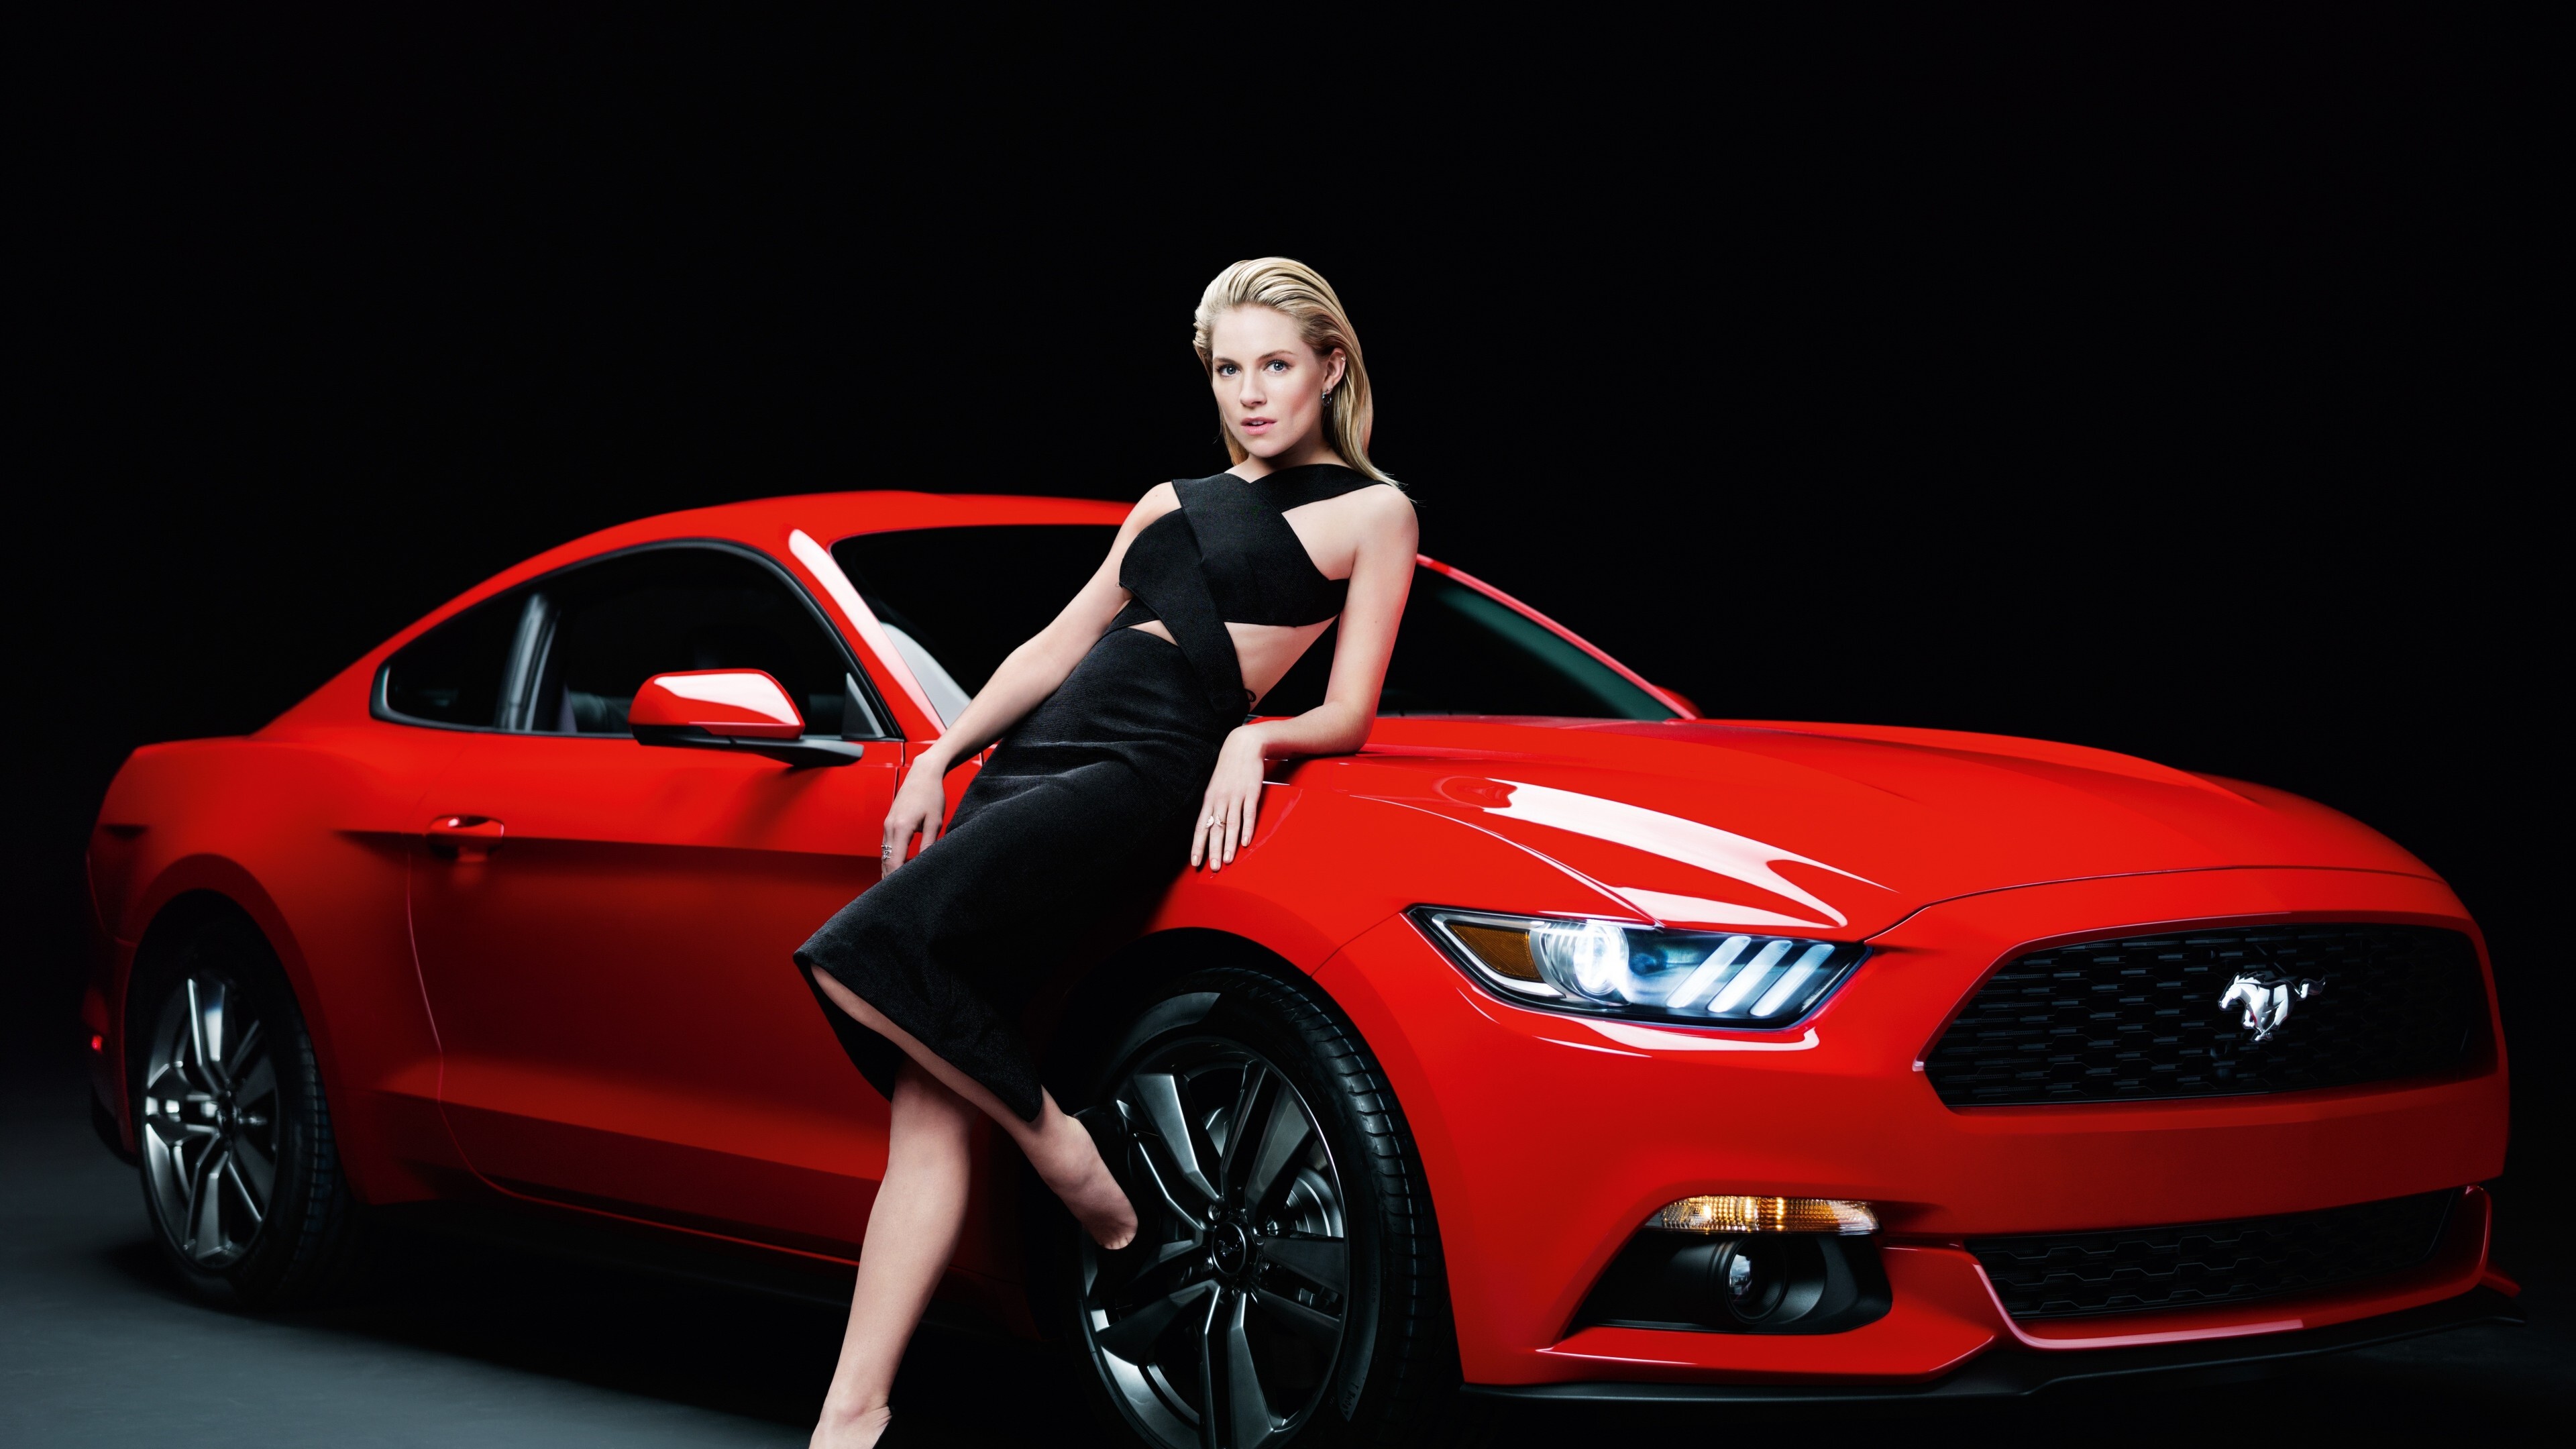 Girls and Muscle Cars: Ford Mustang, Red coupe, Sienna Miller, An American and English actress. 3840x2160 4K Wallpaper.